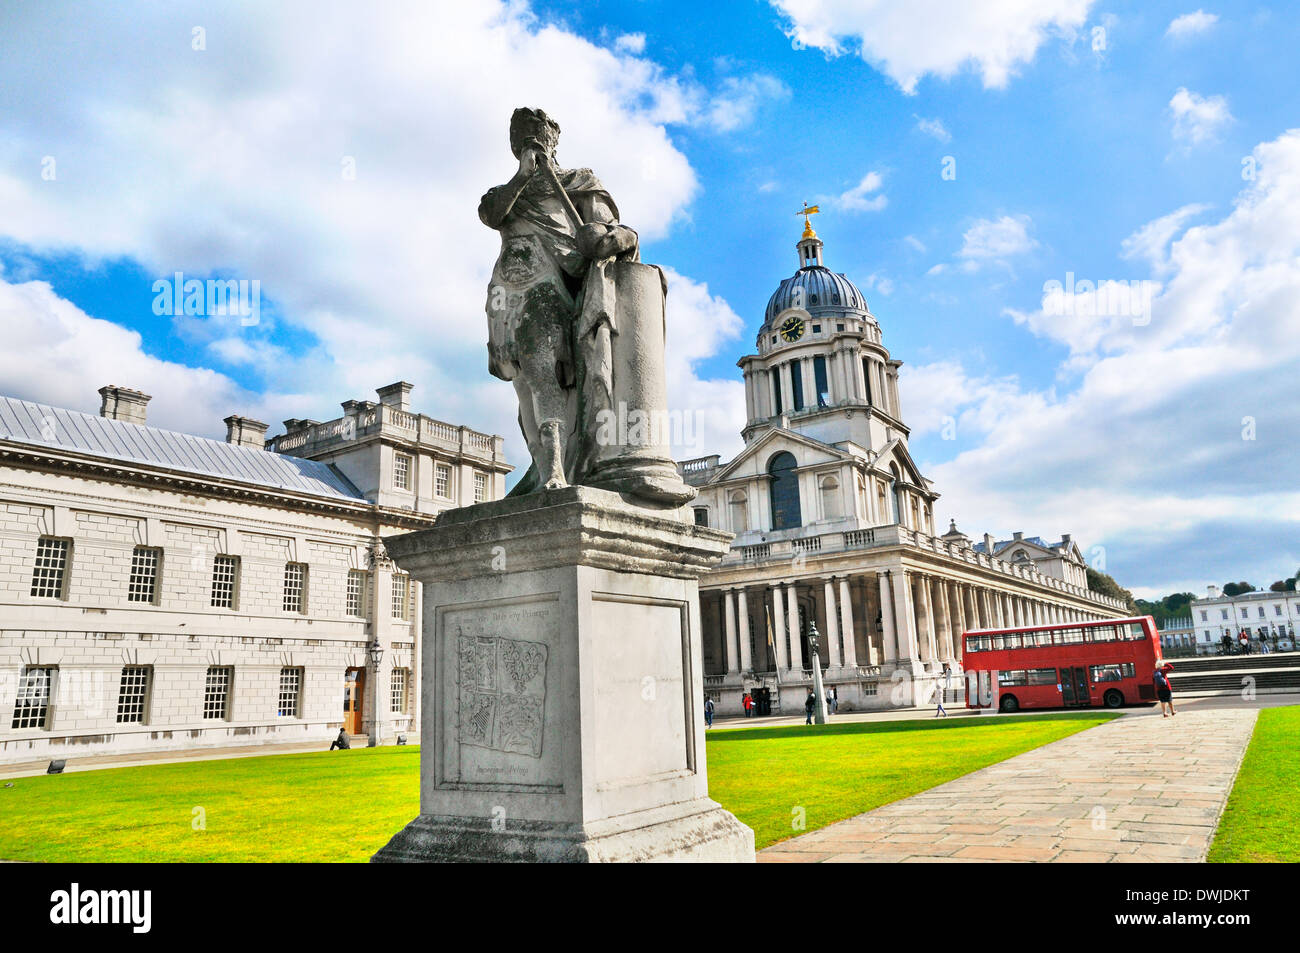 King George II statue and Old Royal Naval College (now home to the University of Greenwich), Greenwich, London, UK Stock Photo